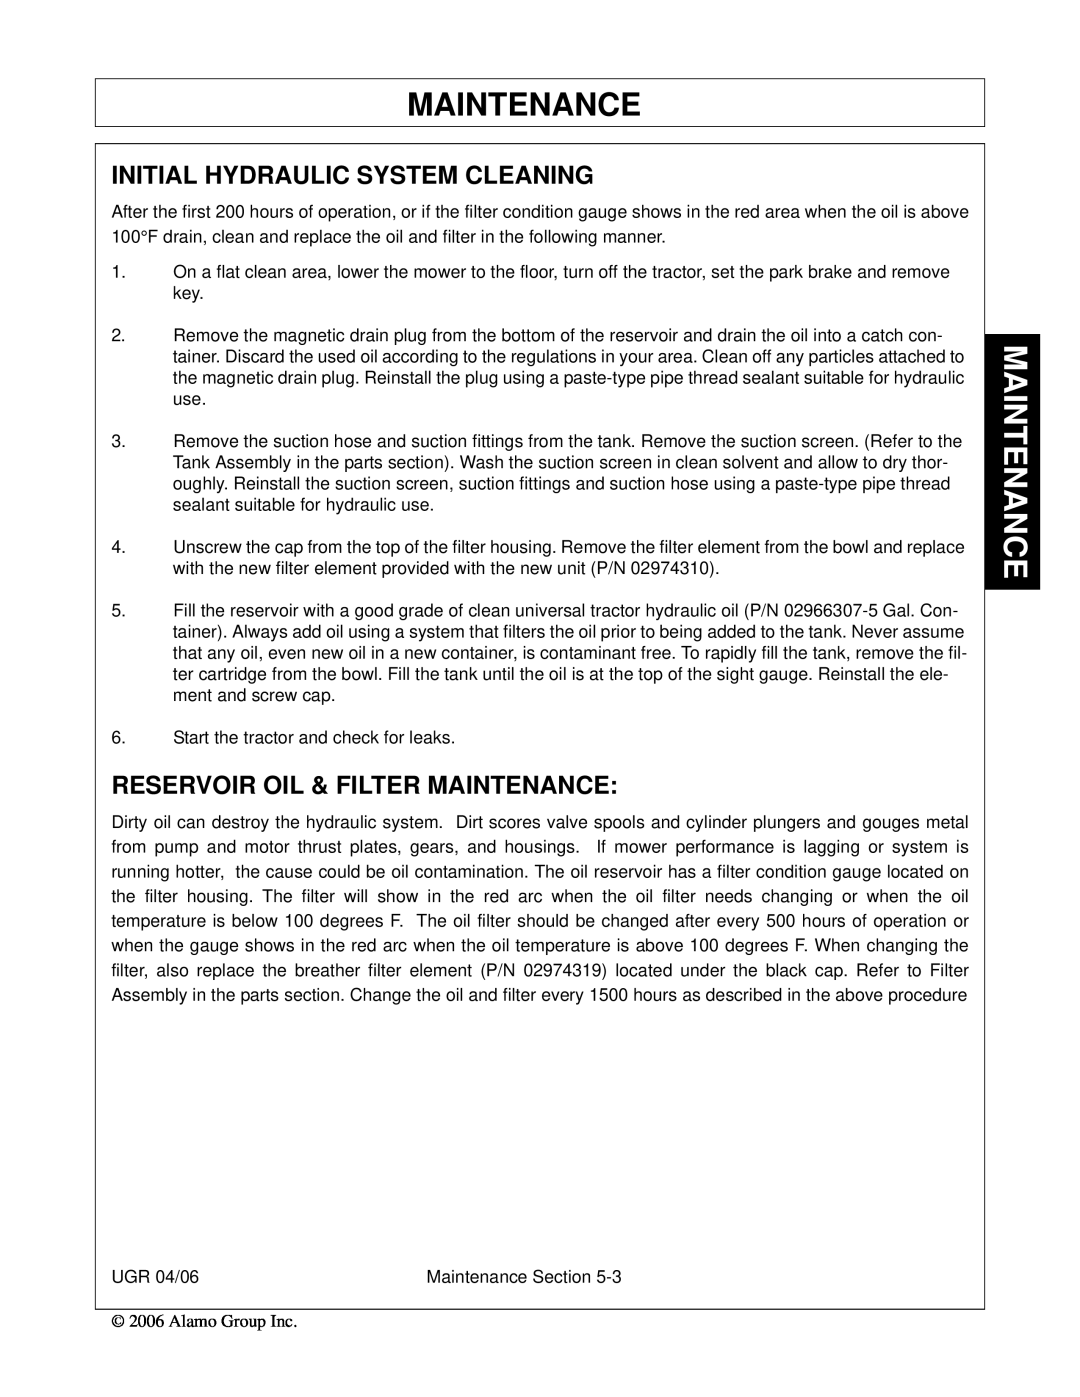 Alamo 02979718C manual Initial Hydraulic System Cleaning, Reservoir Oil & Filter Maintenance 